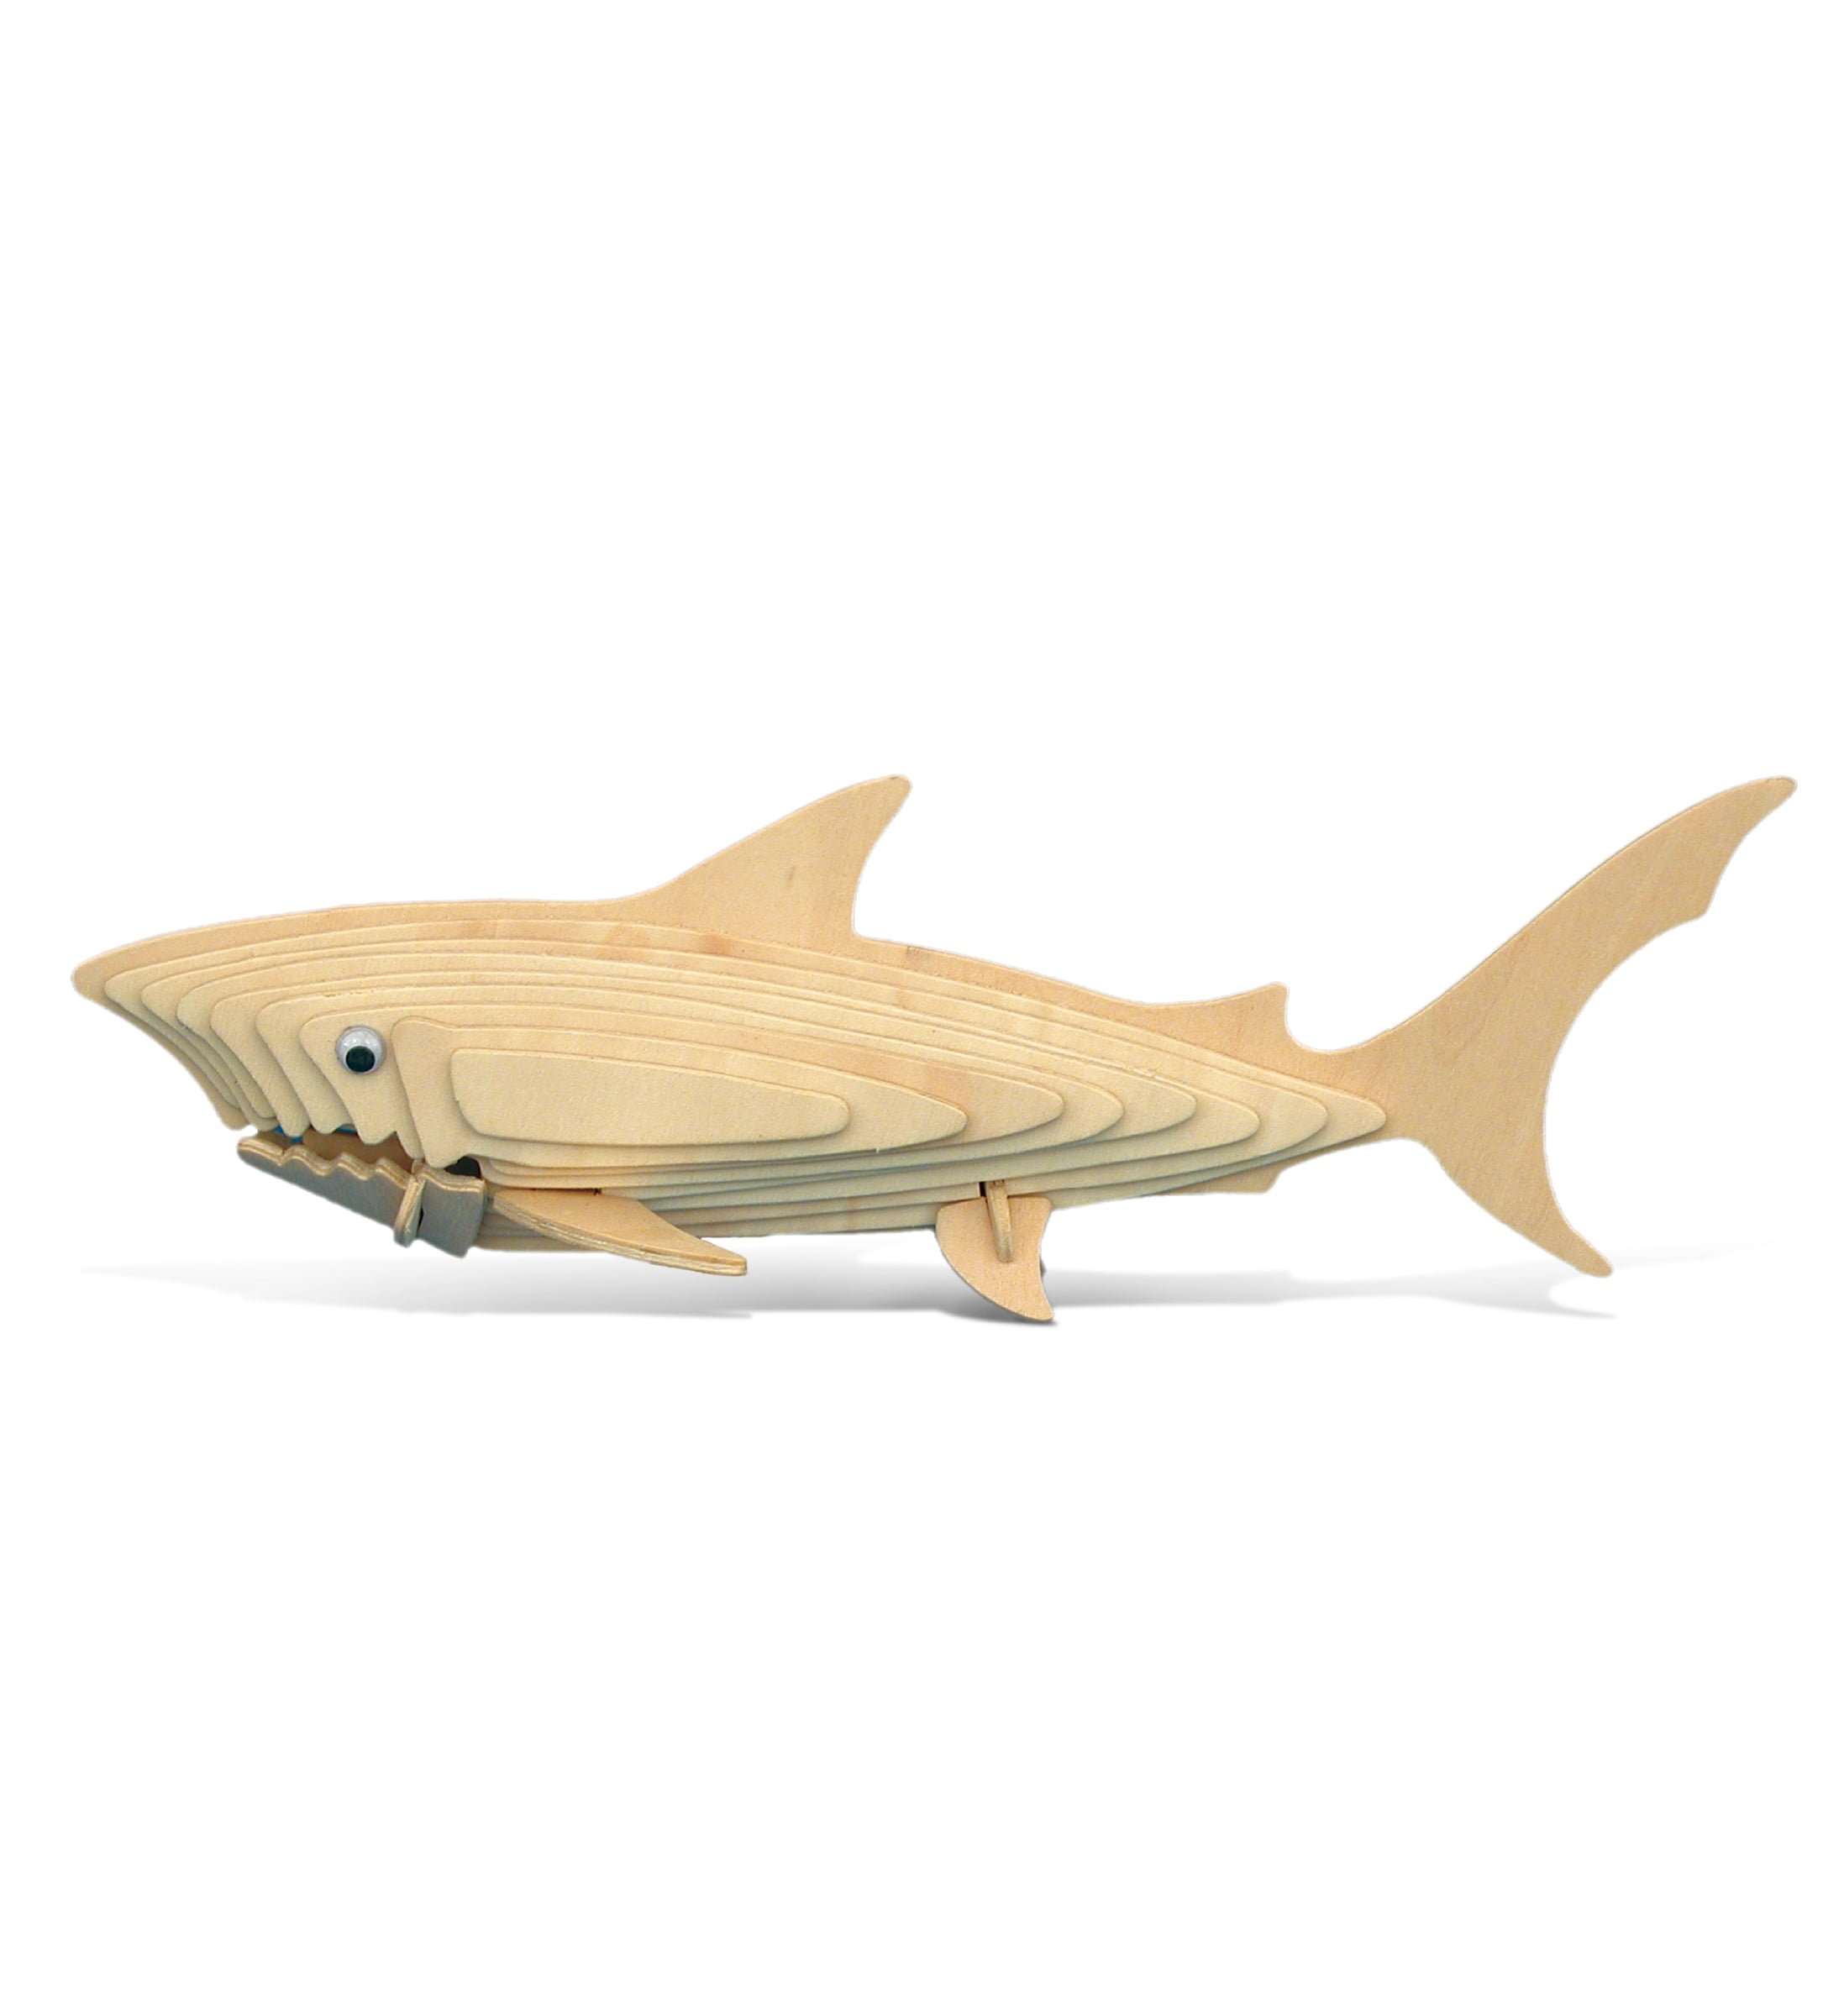 Puzzled 3D Puzzle Shark Wood Craft Construction Model Kit, Fun Unique and  Educational DIY Wooden Toy Assemble Model Unfinished Crafting Hobby Puzzle,  